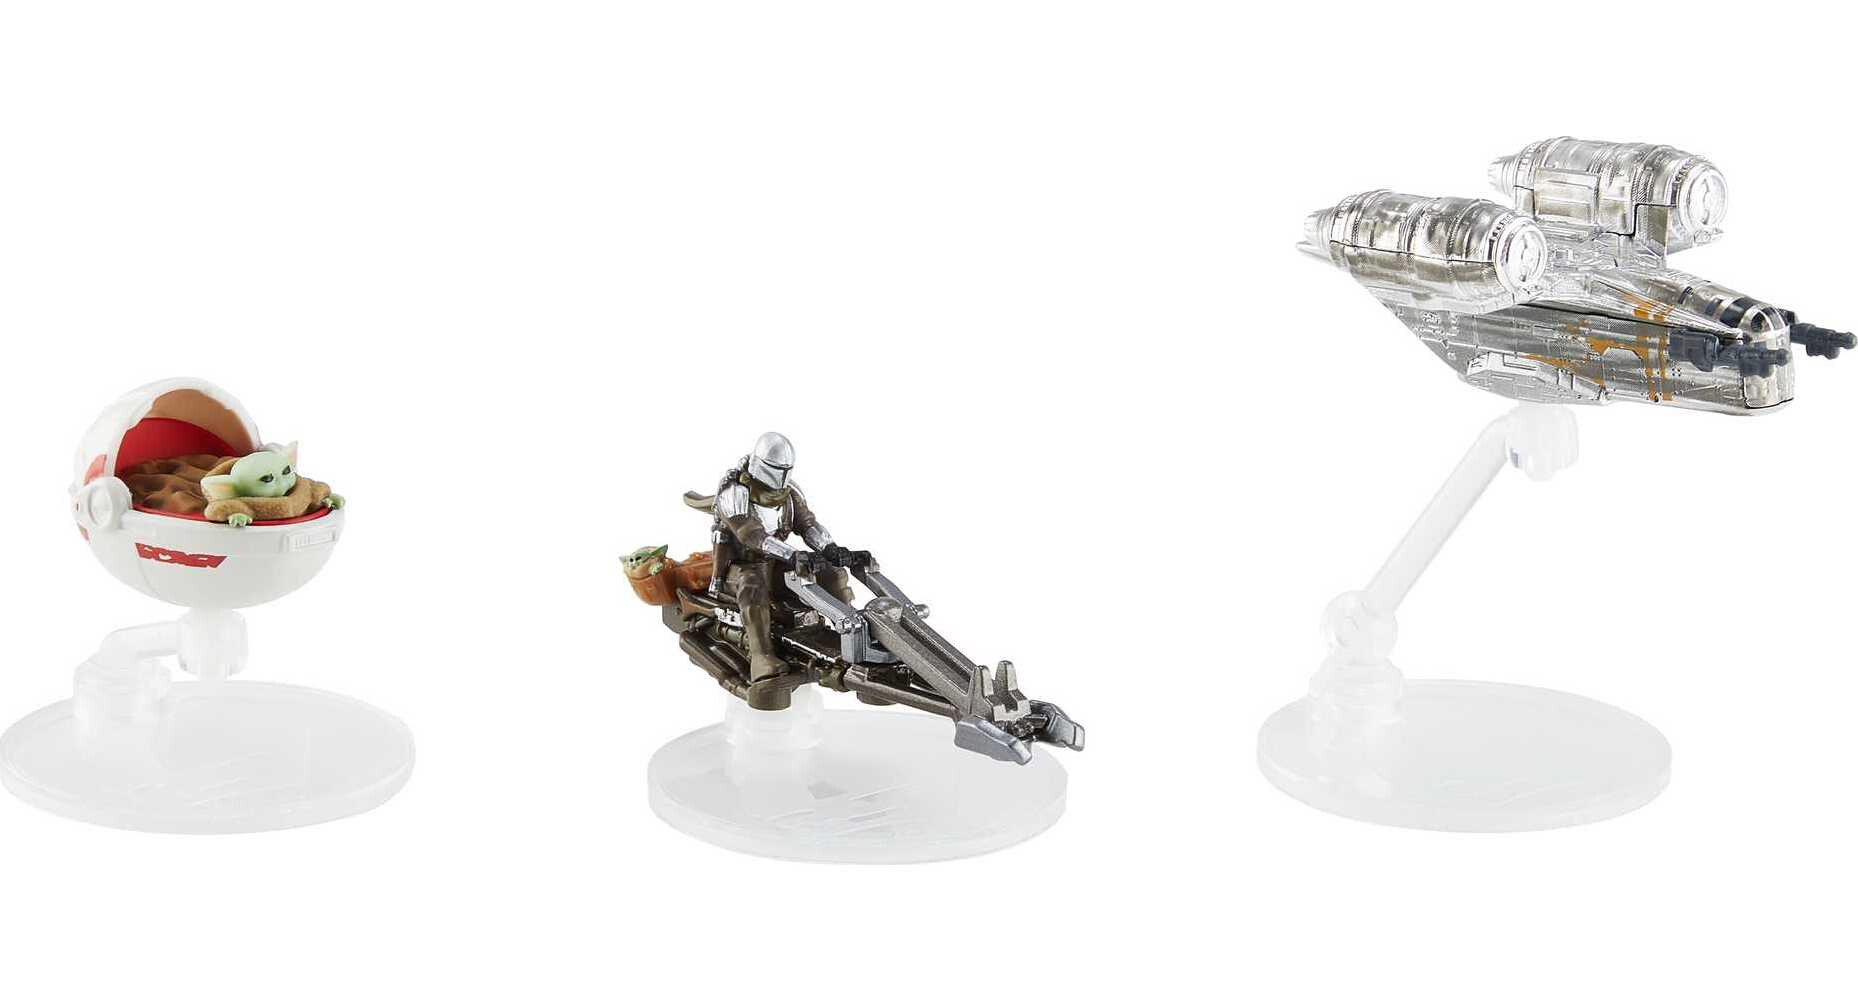 Hot Wheels Star Wars Starships 3-Pack Inspired by The Mandalorian, Set of 3 Die-Cast Ships - image 3 of 4